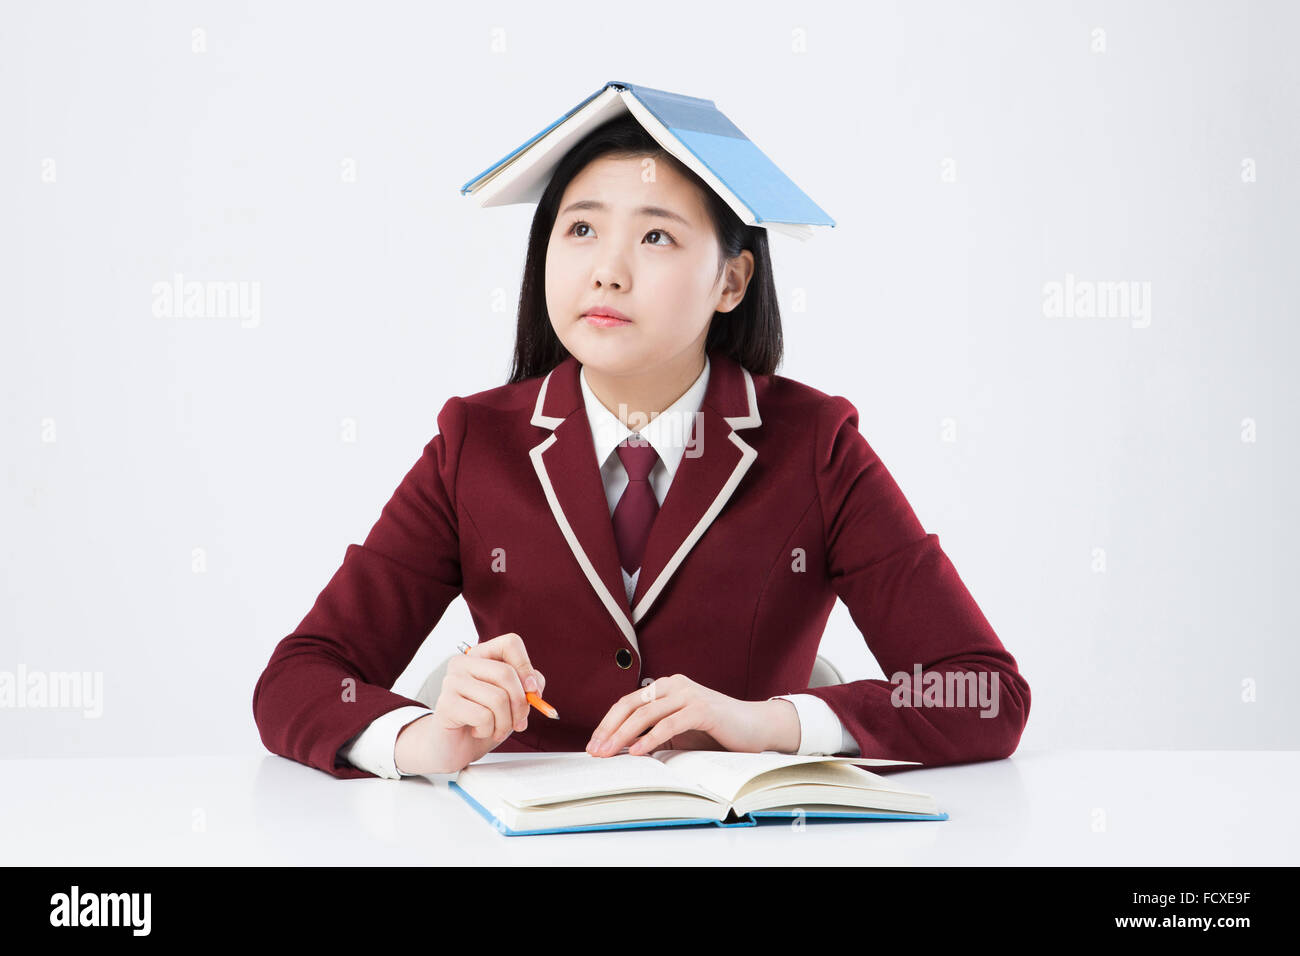 High school girl in school uniform seated at desk looking up with another book placed on her head Stock Photo